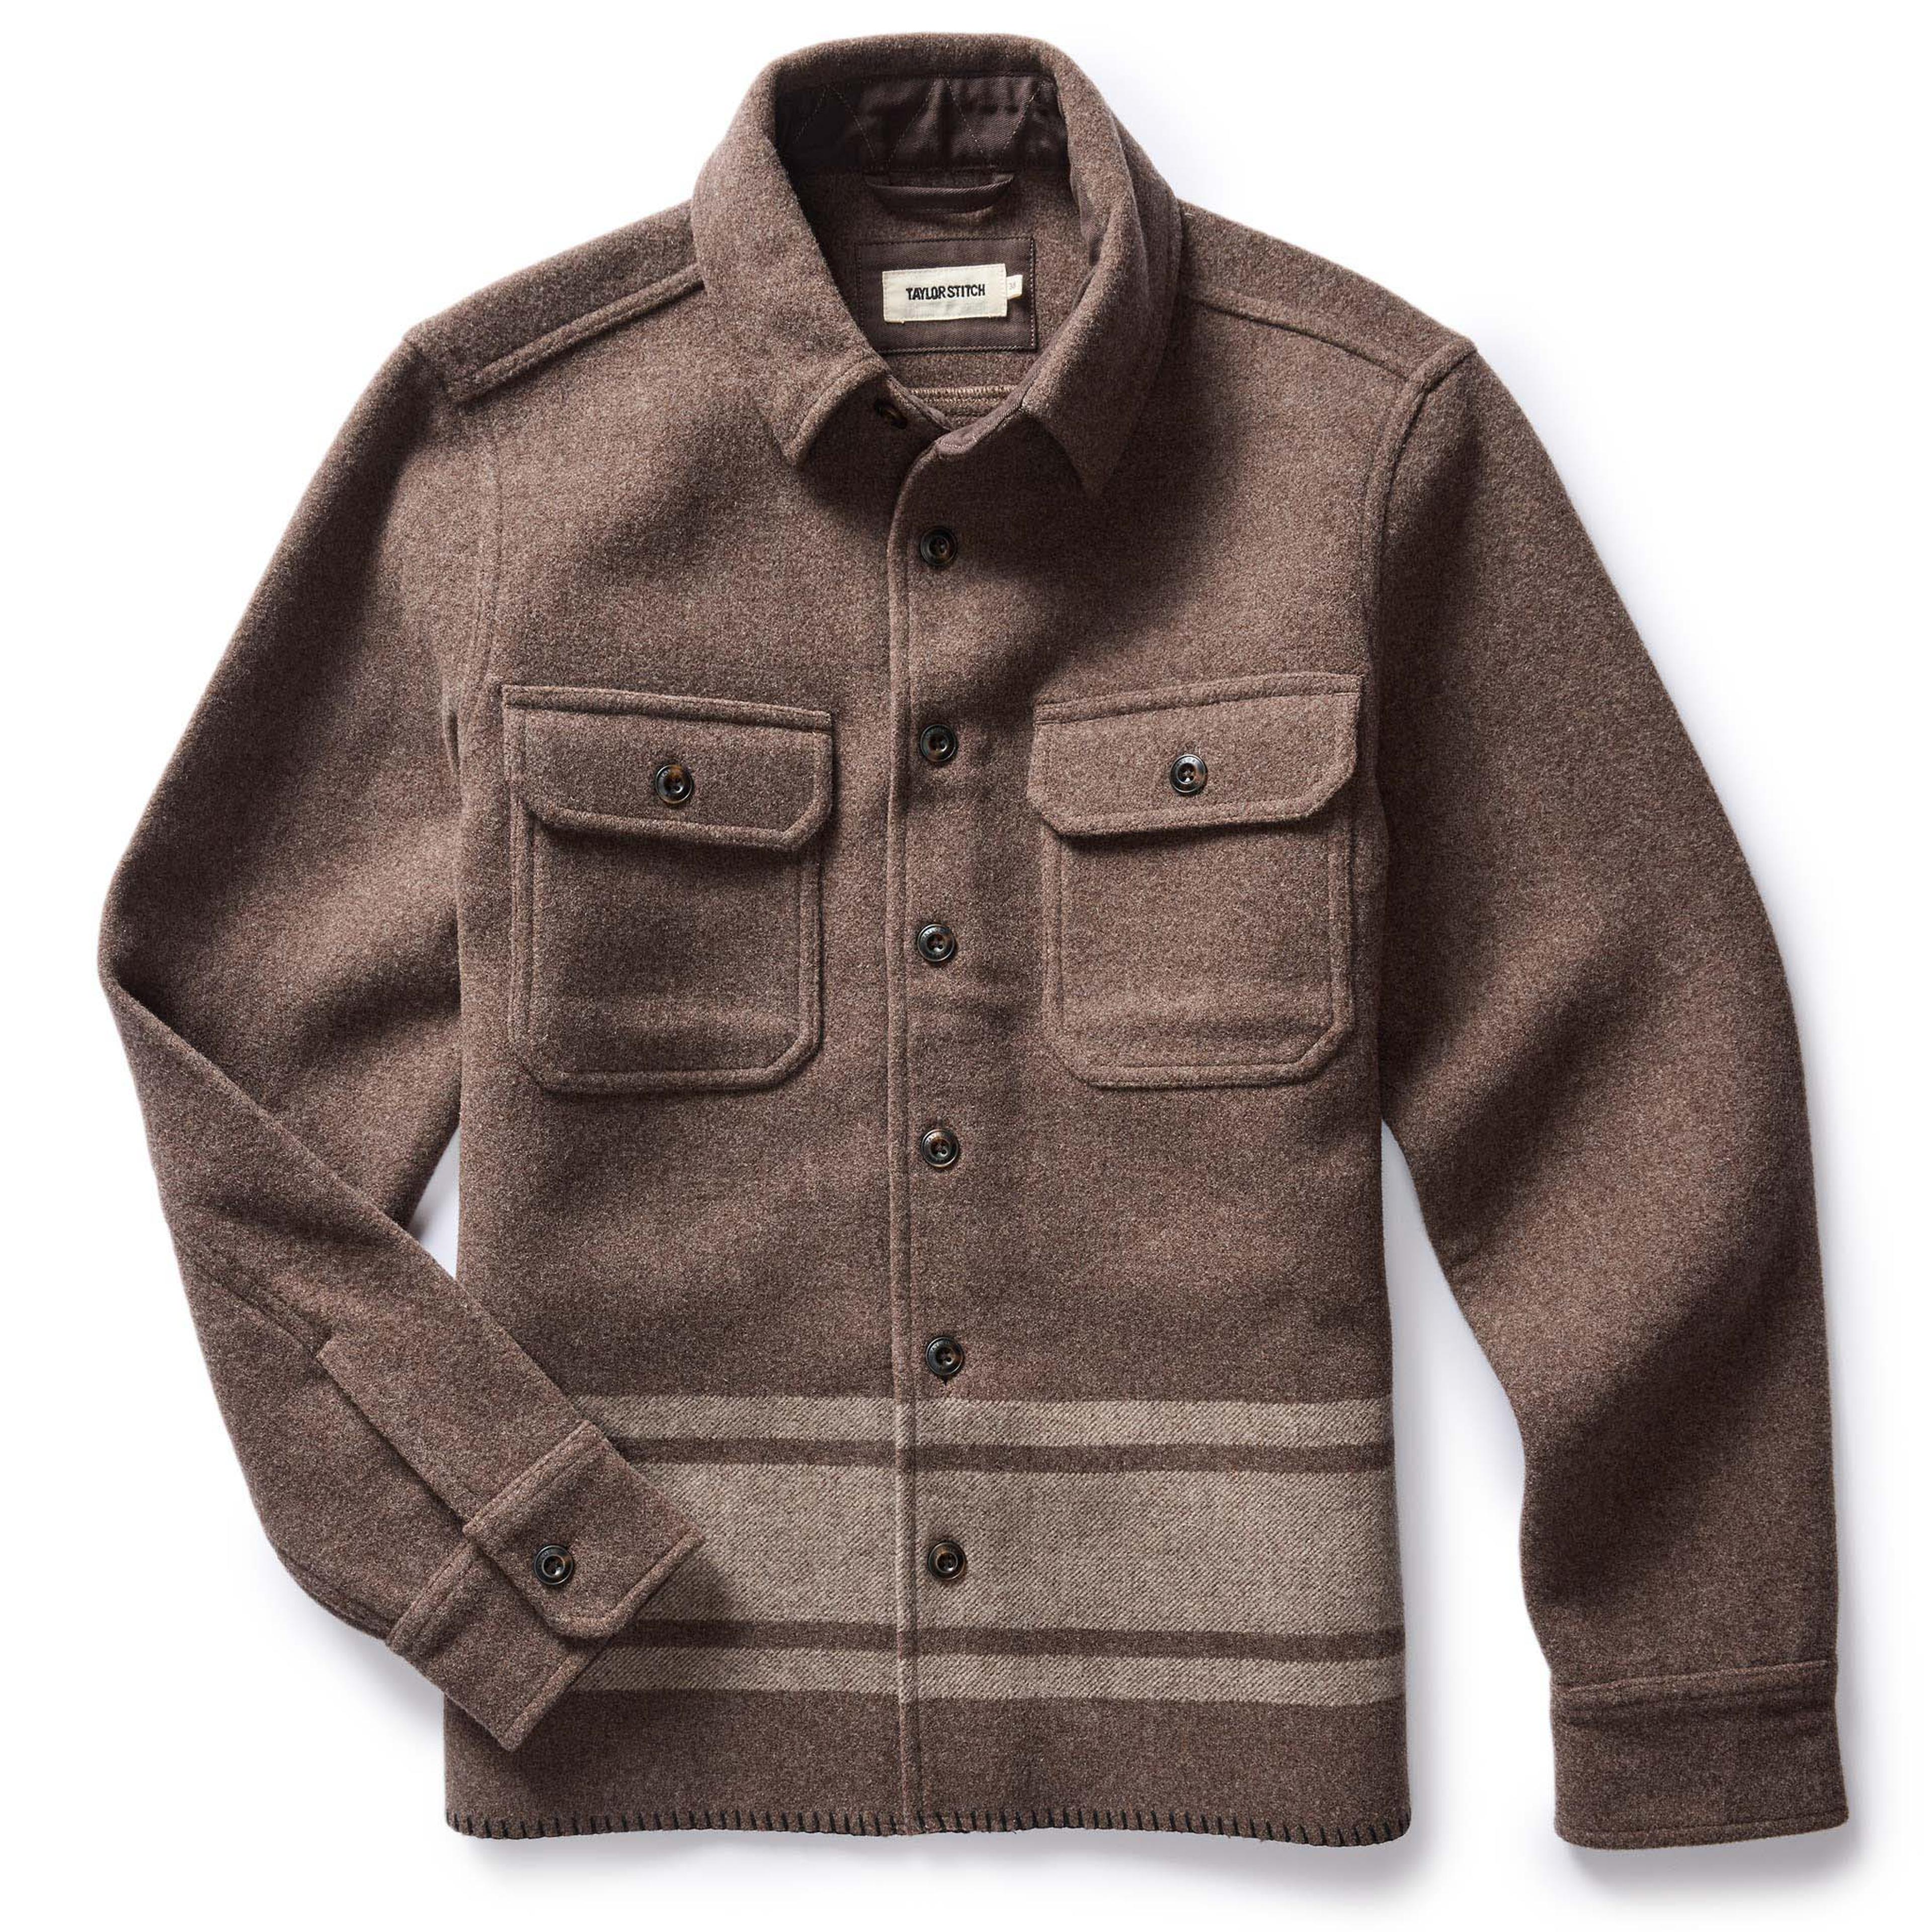 The Ranger Shirt in Sable Heather Blanket Stripe Wool | Taylor Stitch